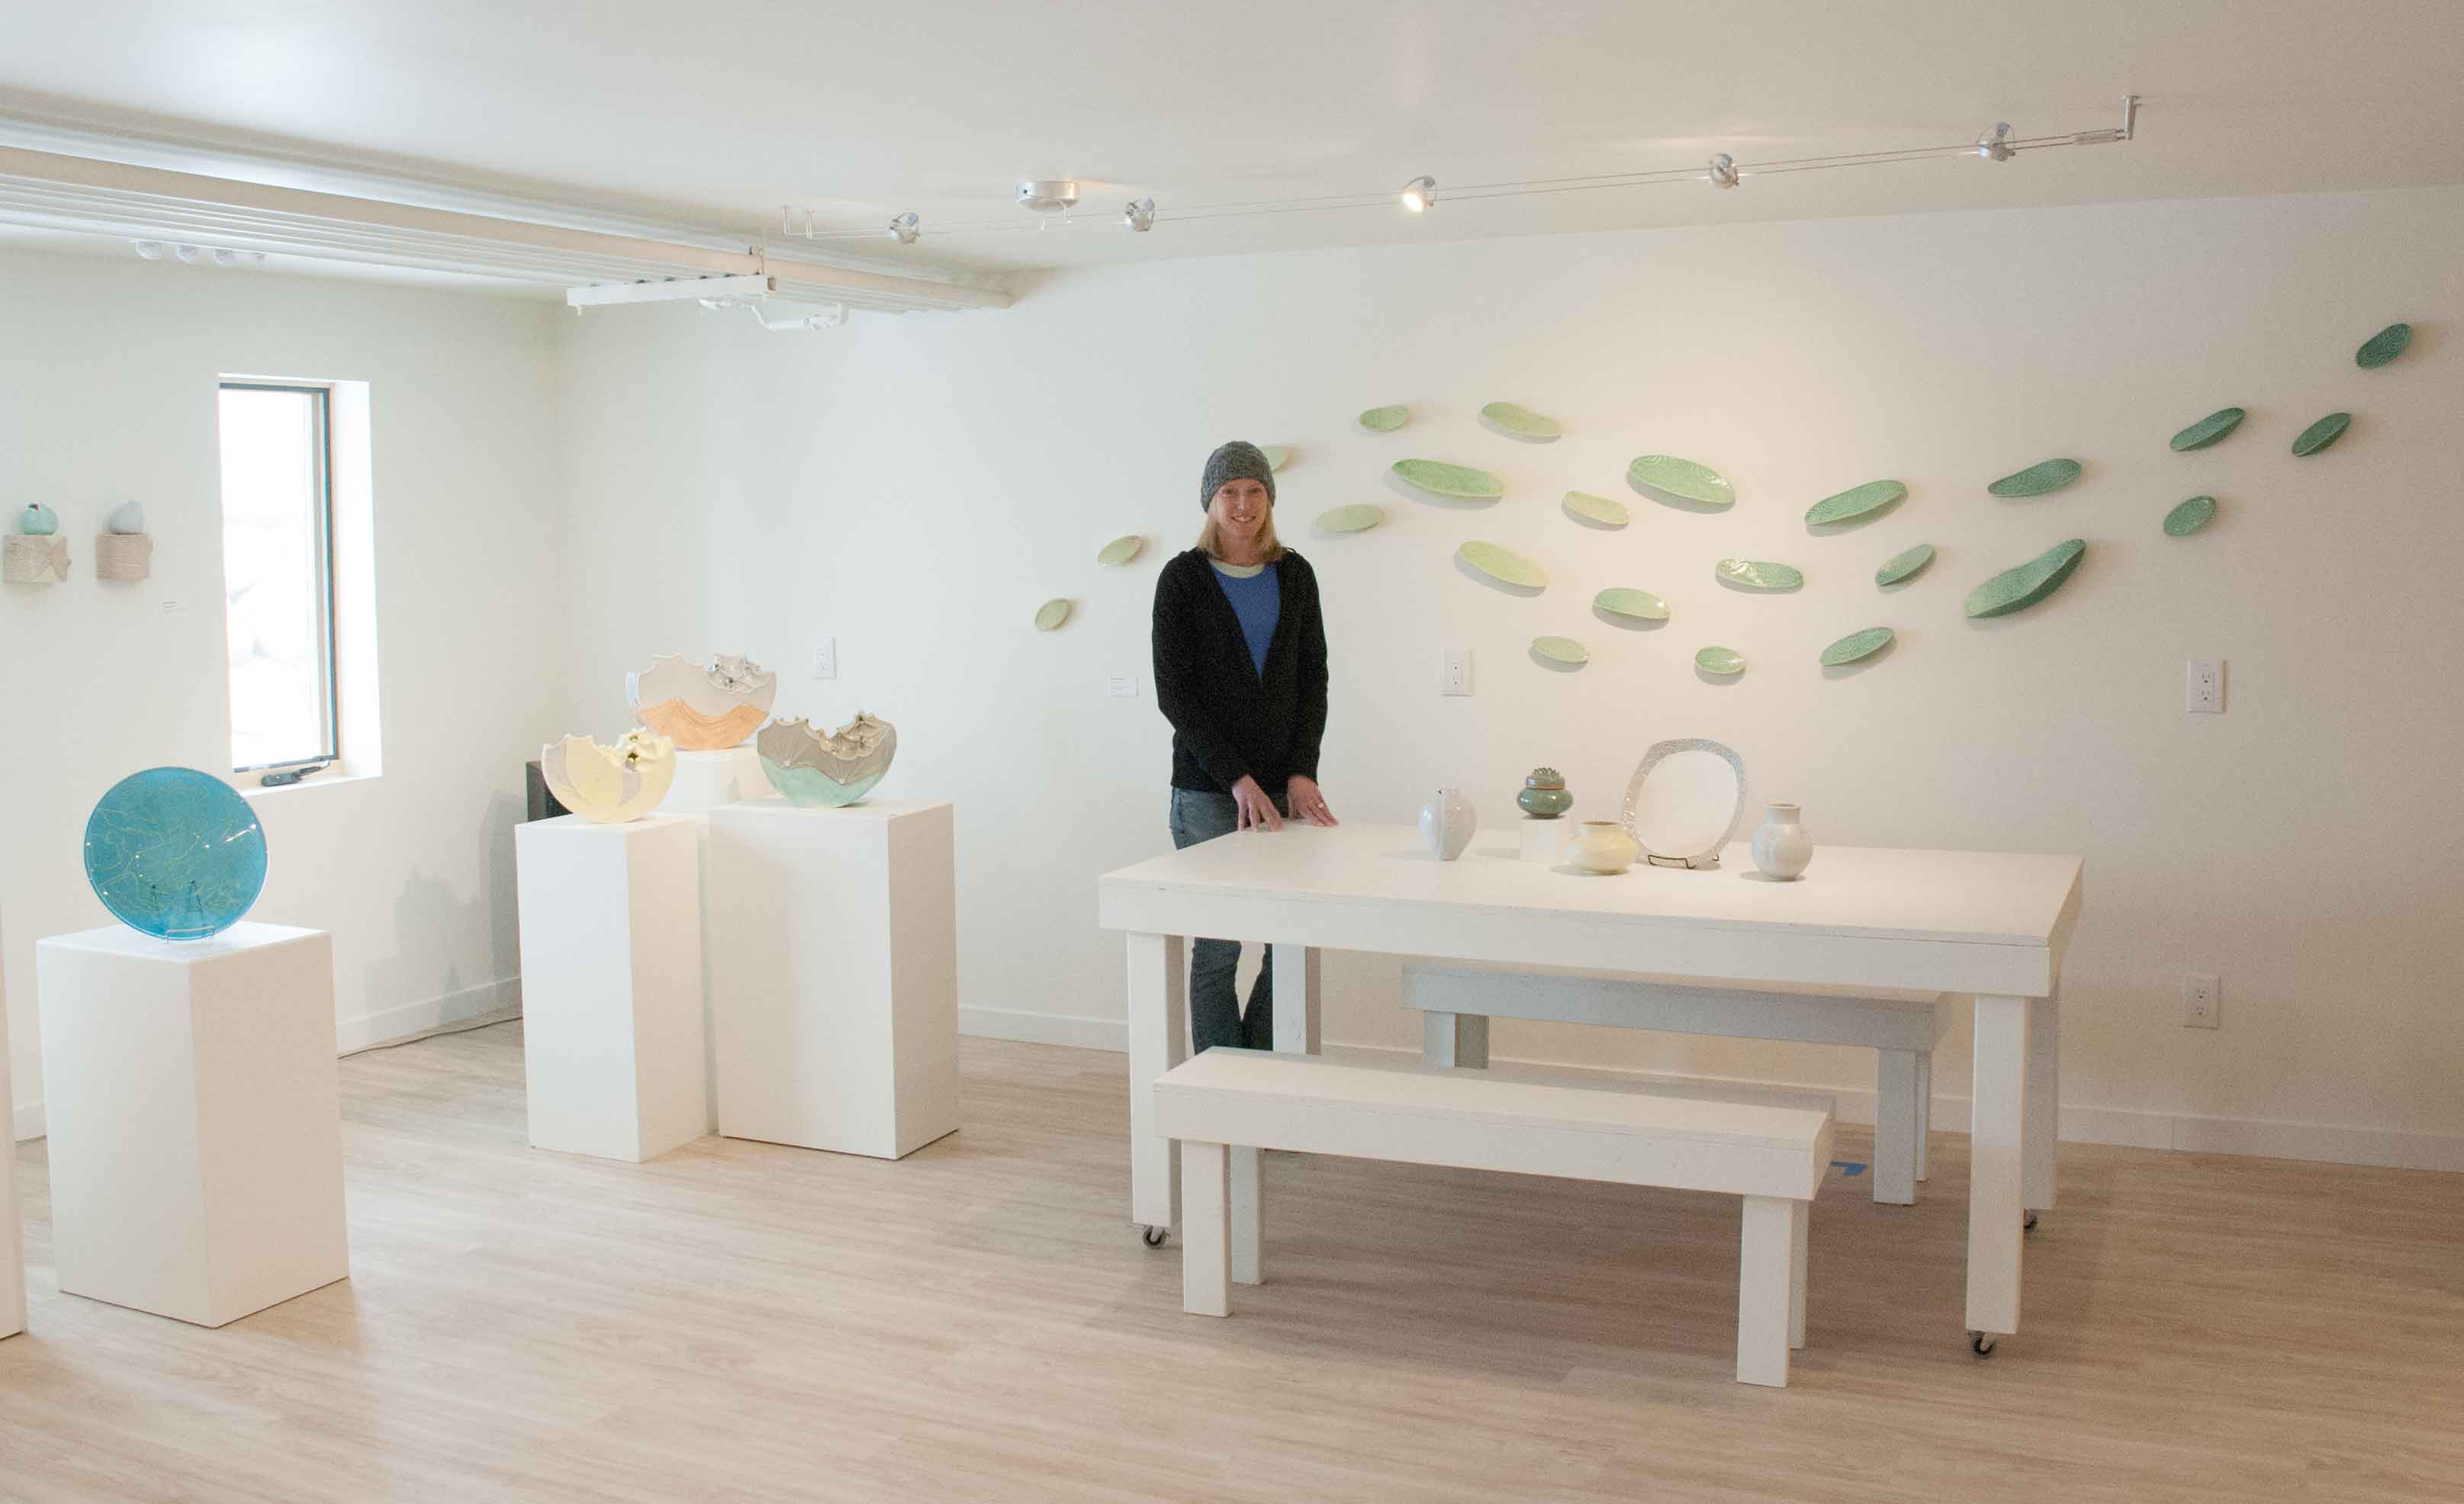 Julie K. Anderson in the Warehome Studios Gallery.  Glass plate on left by Gregory Grasso, all other work by Anderson; large wall sculpture behind Anderson titled “Ripple,” 2016. Photo by Megan Westercamp.